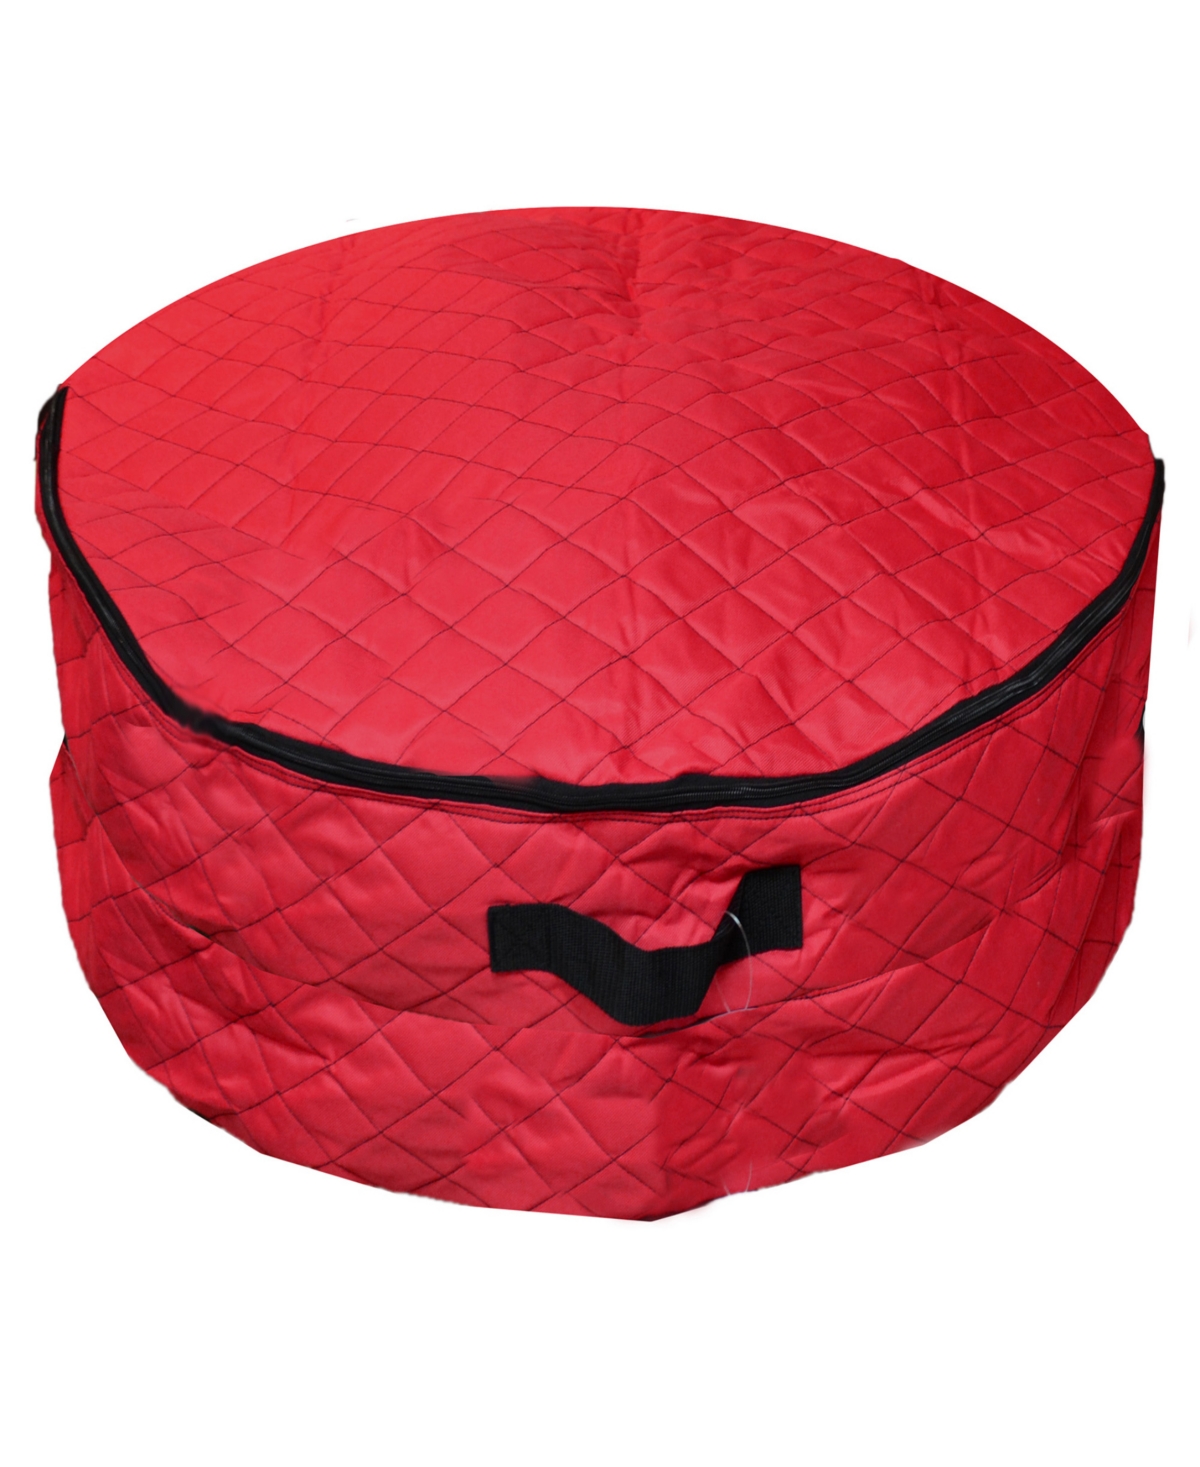 2 in 1 Quilted Zip Up Christmas Garland and Wreath Storage Bag - Red